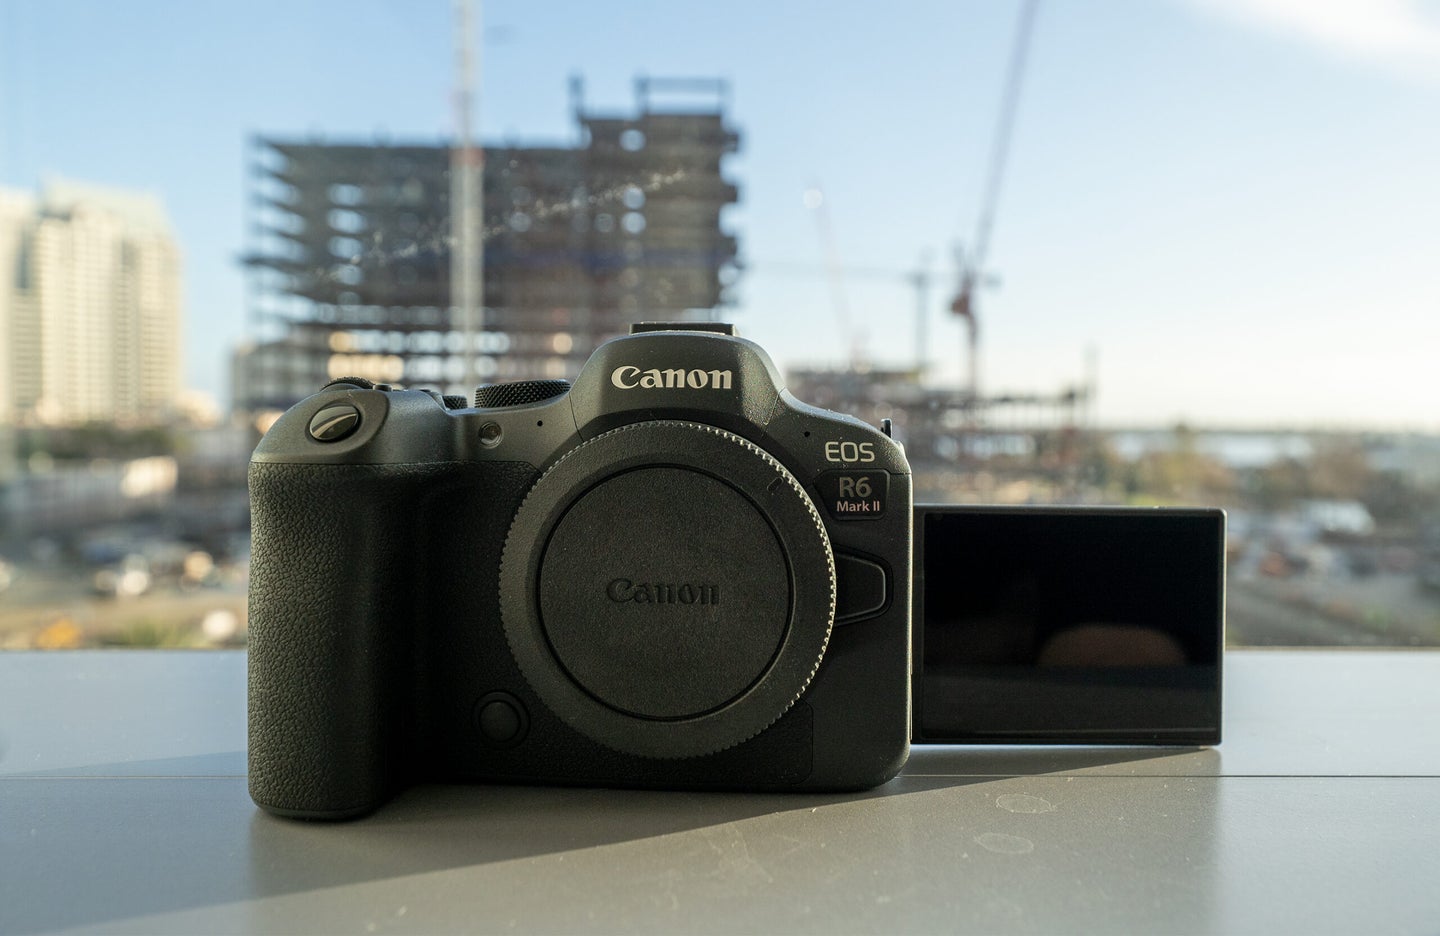 The Canon EOS R6 Mark II is a great full-frame mirrorless camera.